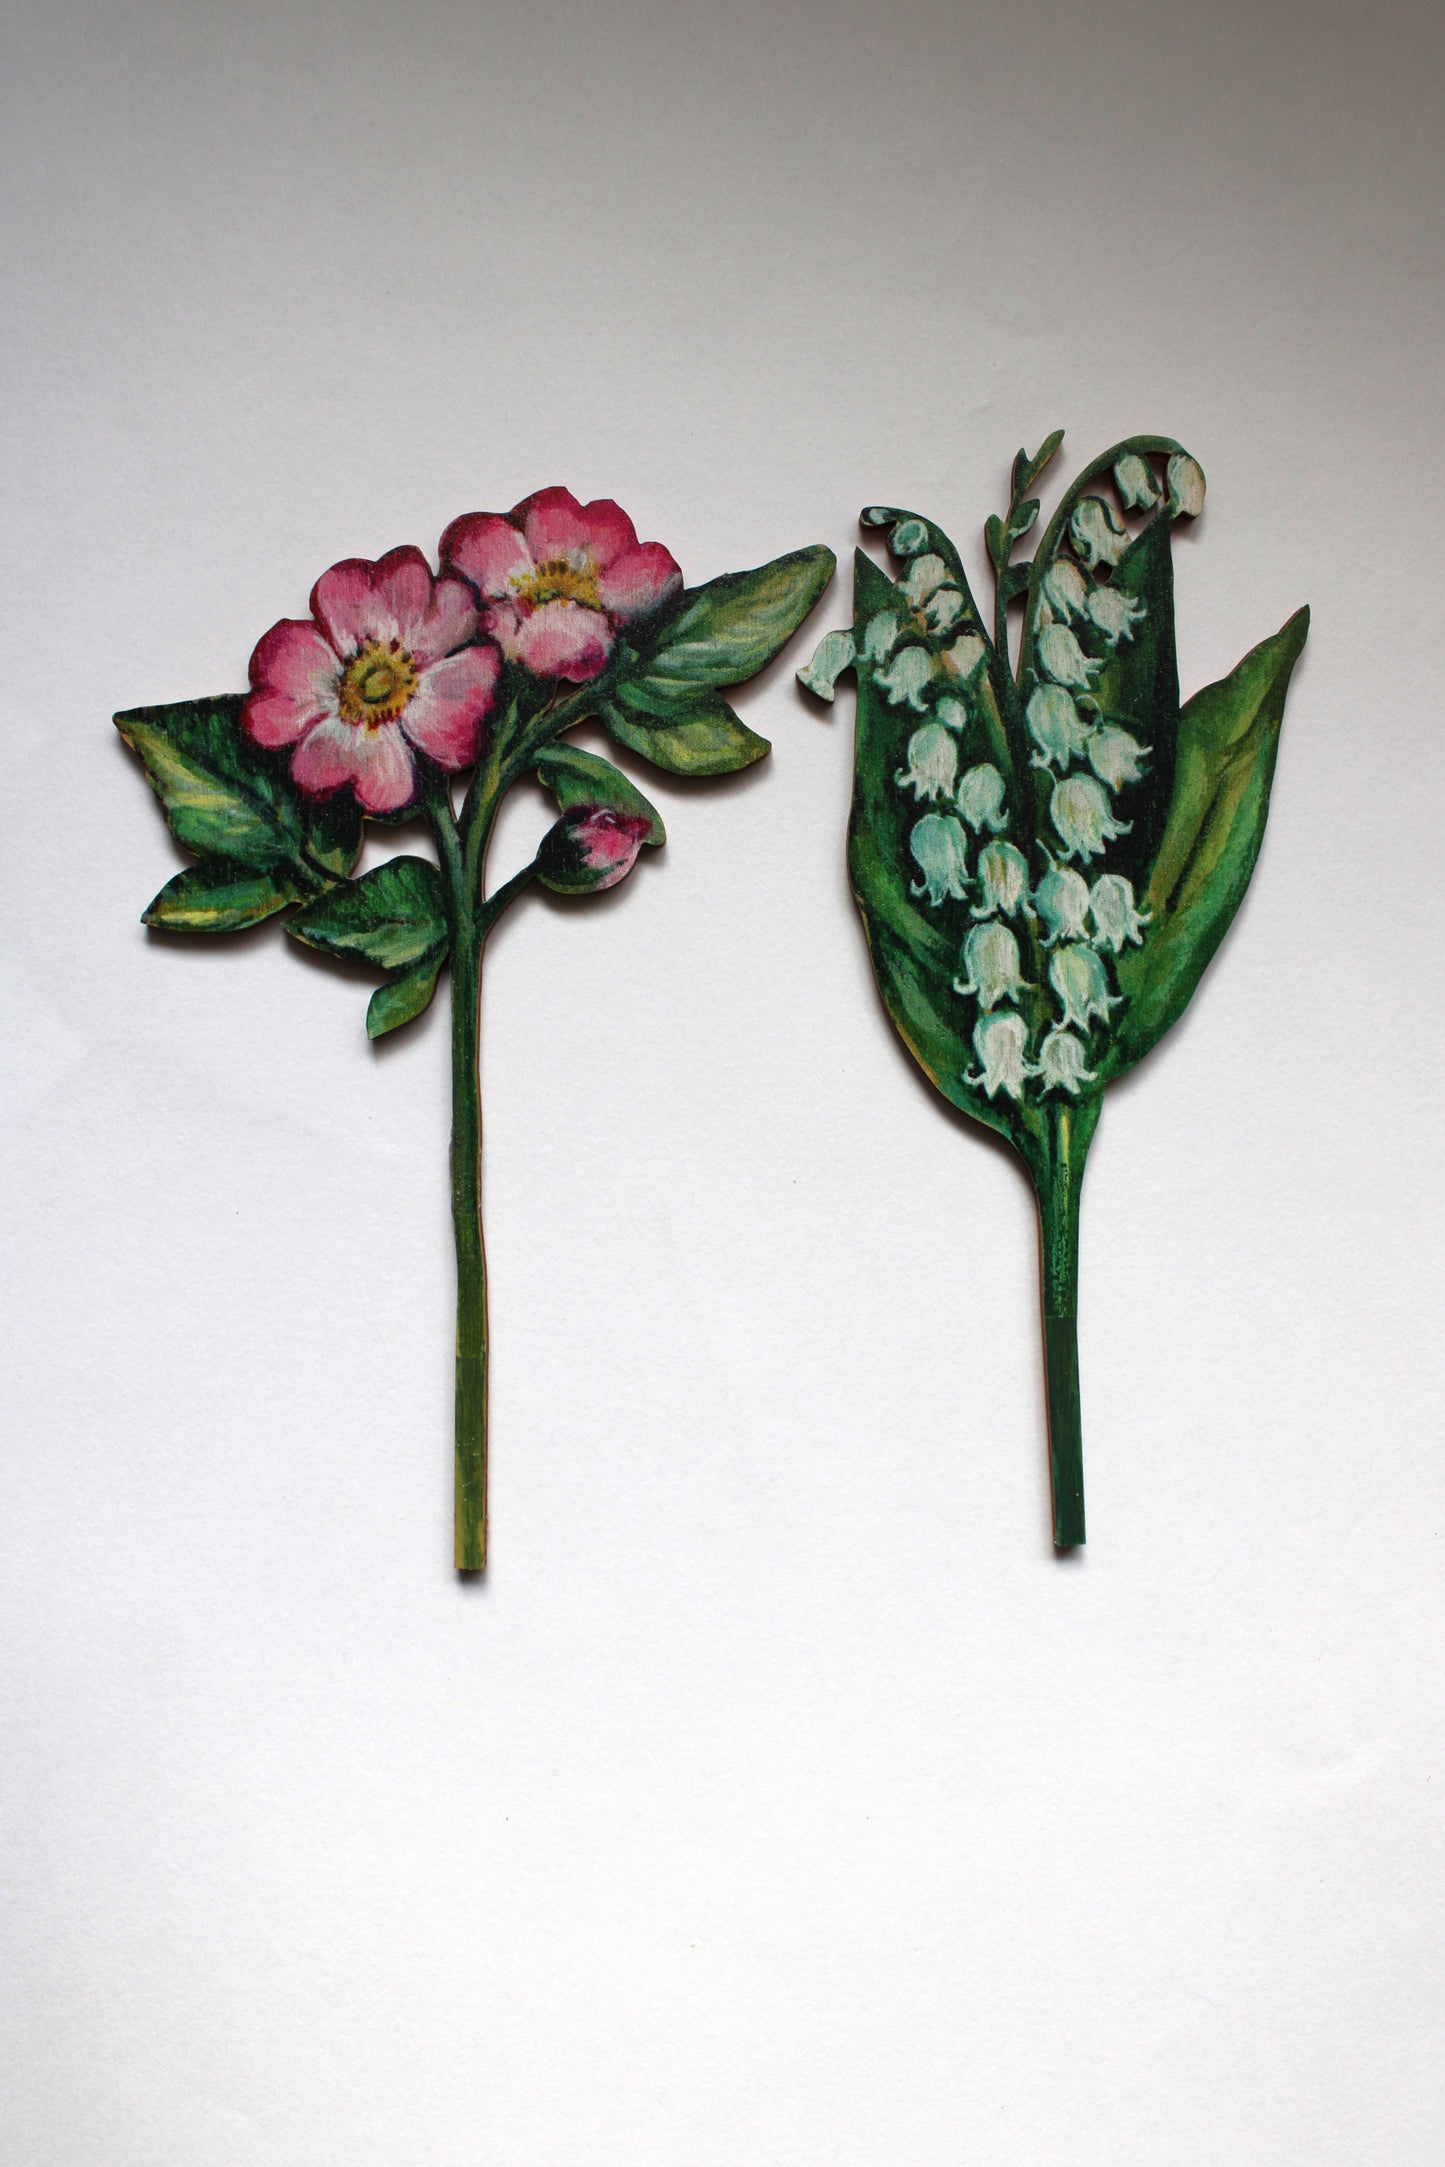 Spring Flowers in glass bud vase ~ Small Wooden  Floral Stems Dog Rose and Lily of the Valley